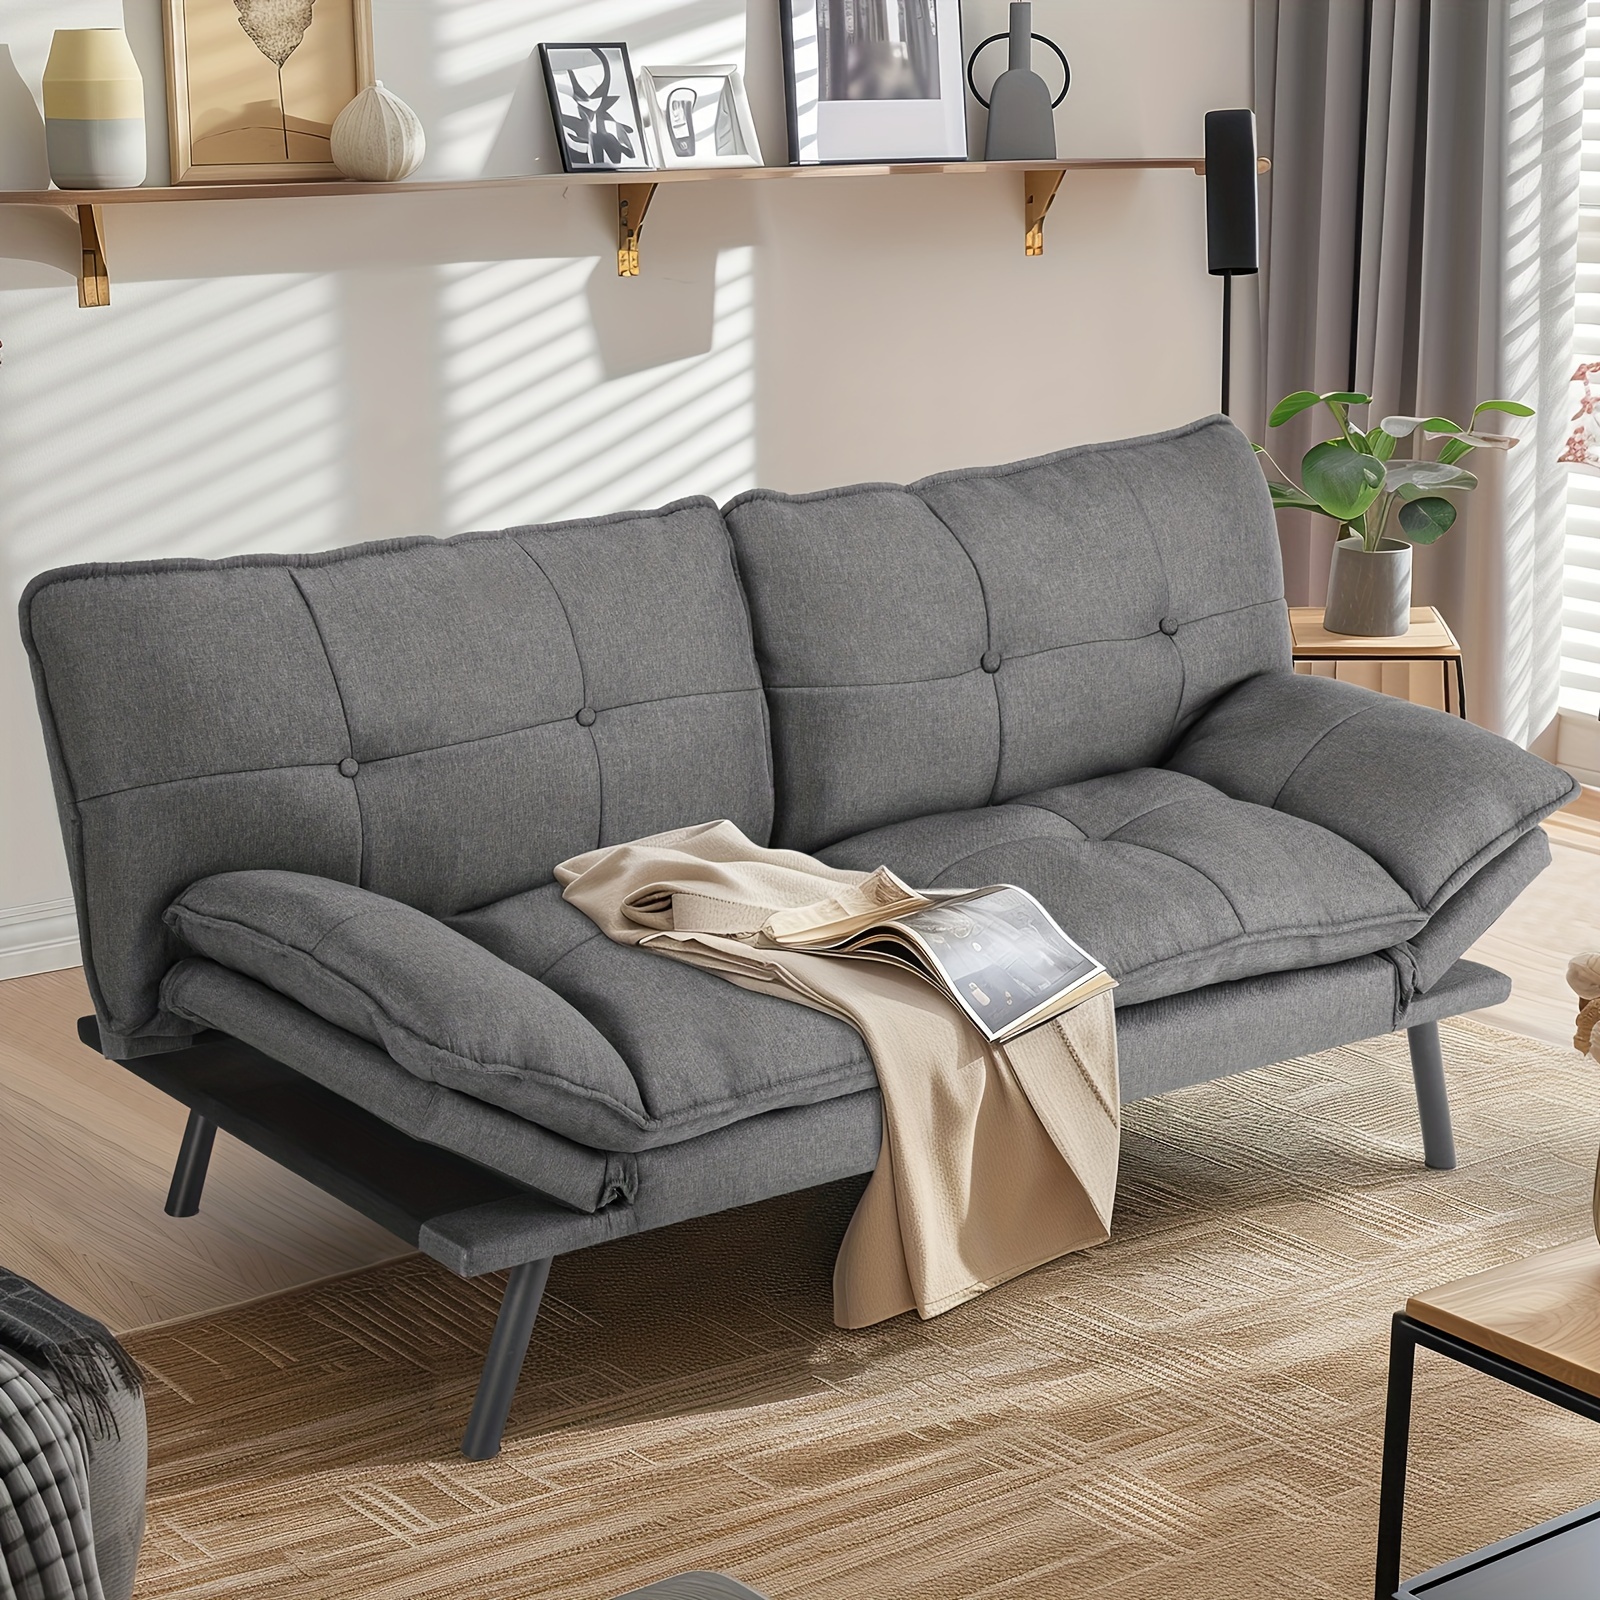 

Memory Foam Futon Loveseat Sofa, Convertible Sofa Bed Couch Small Splitback Sofa Sleeper For Living Room, Office, Grey